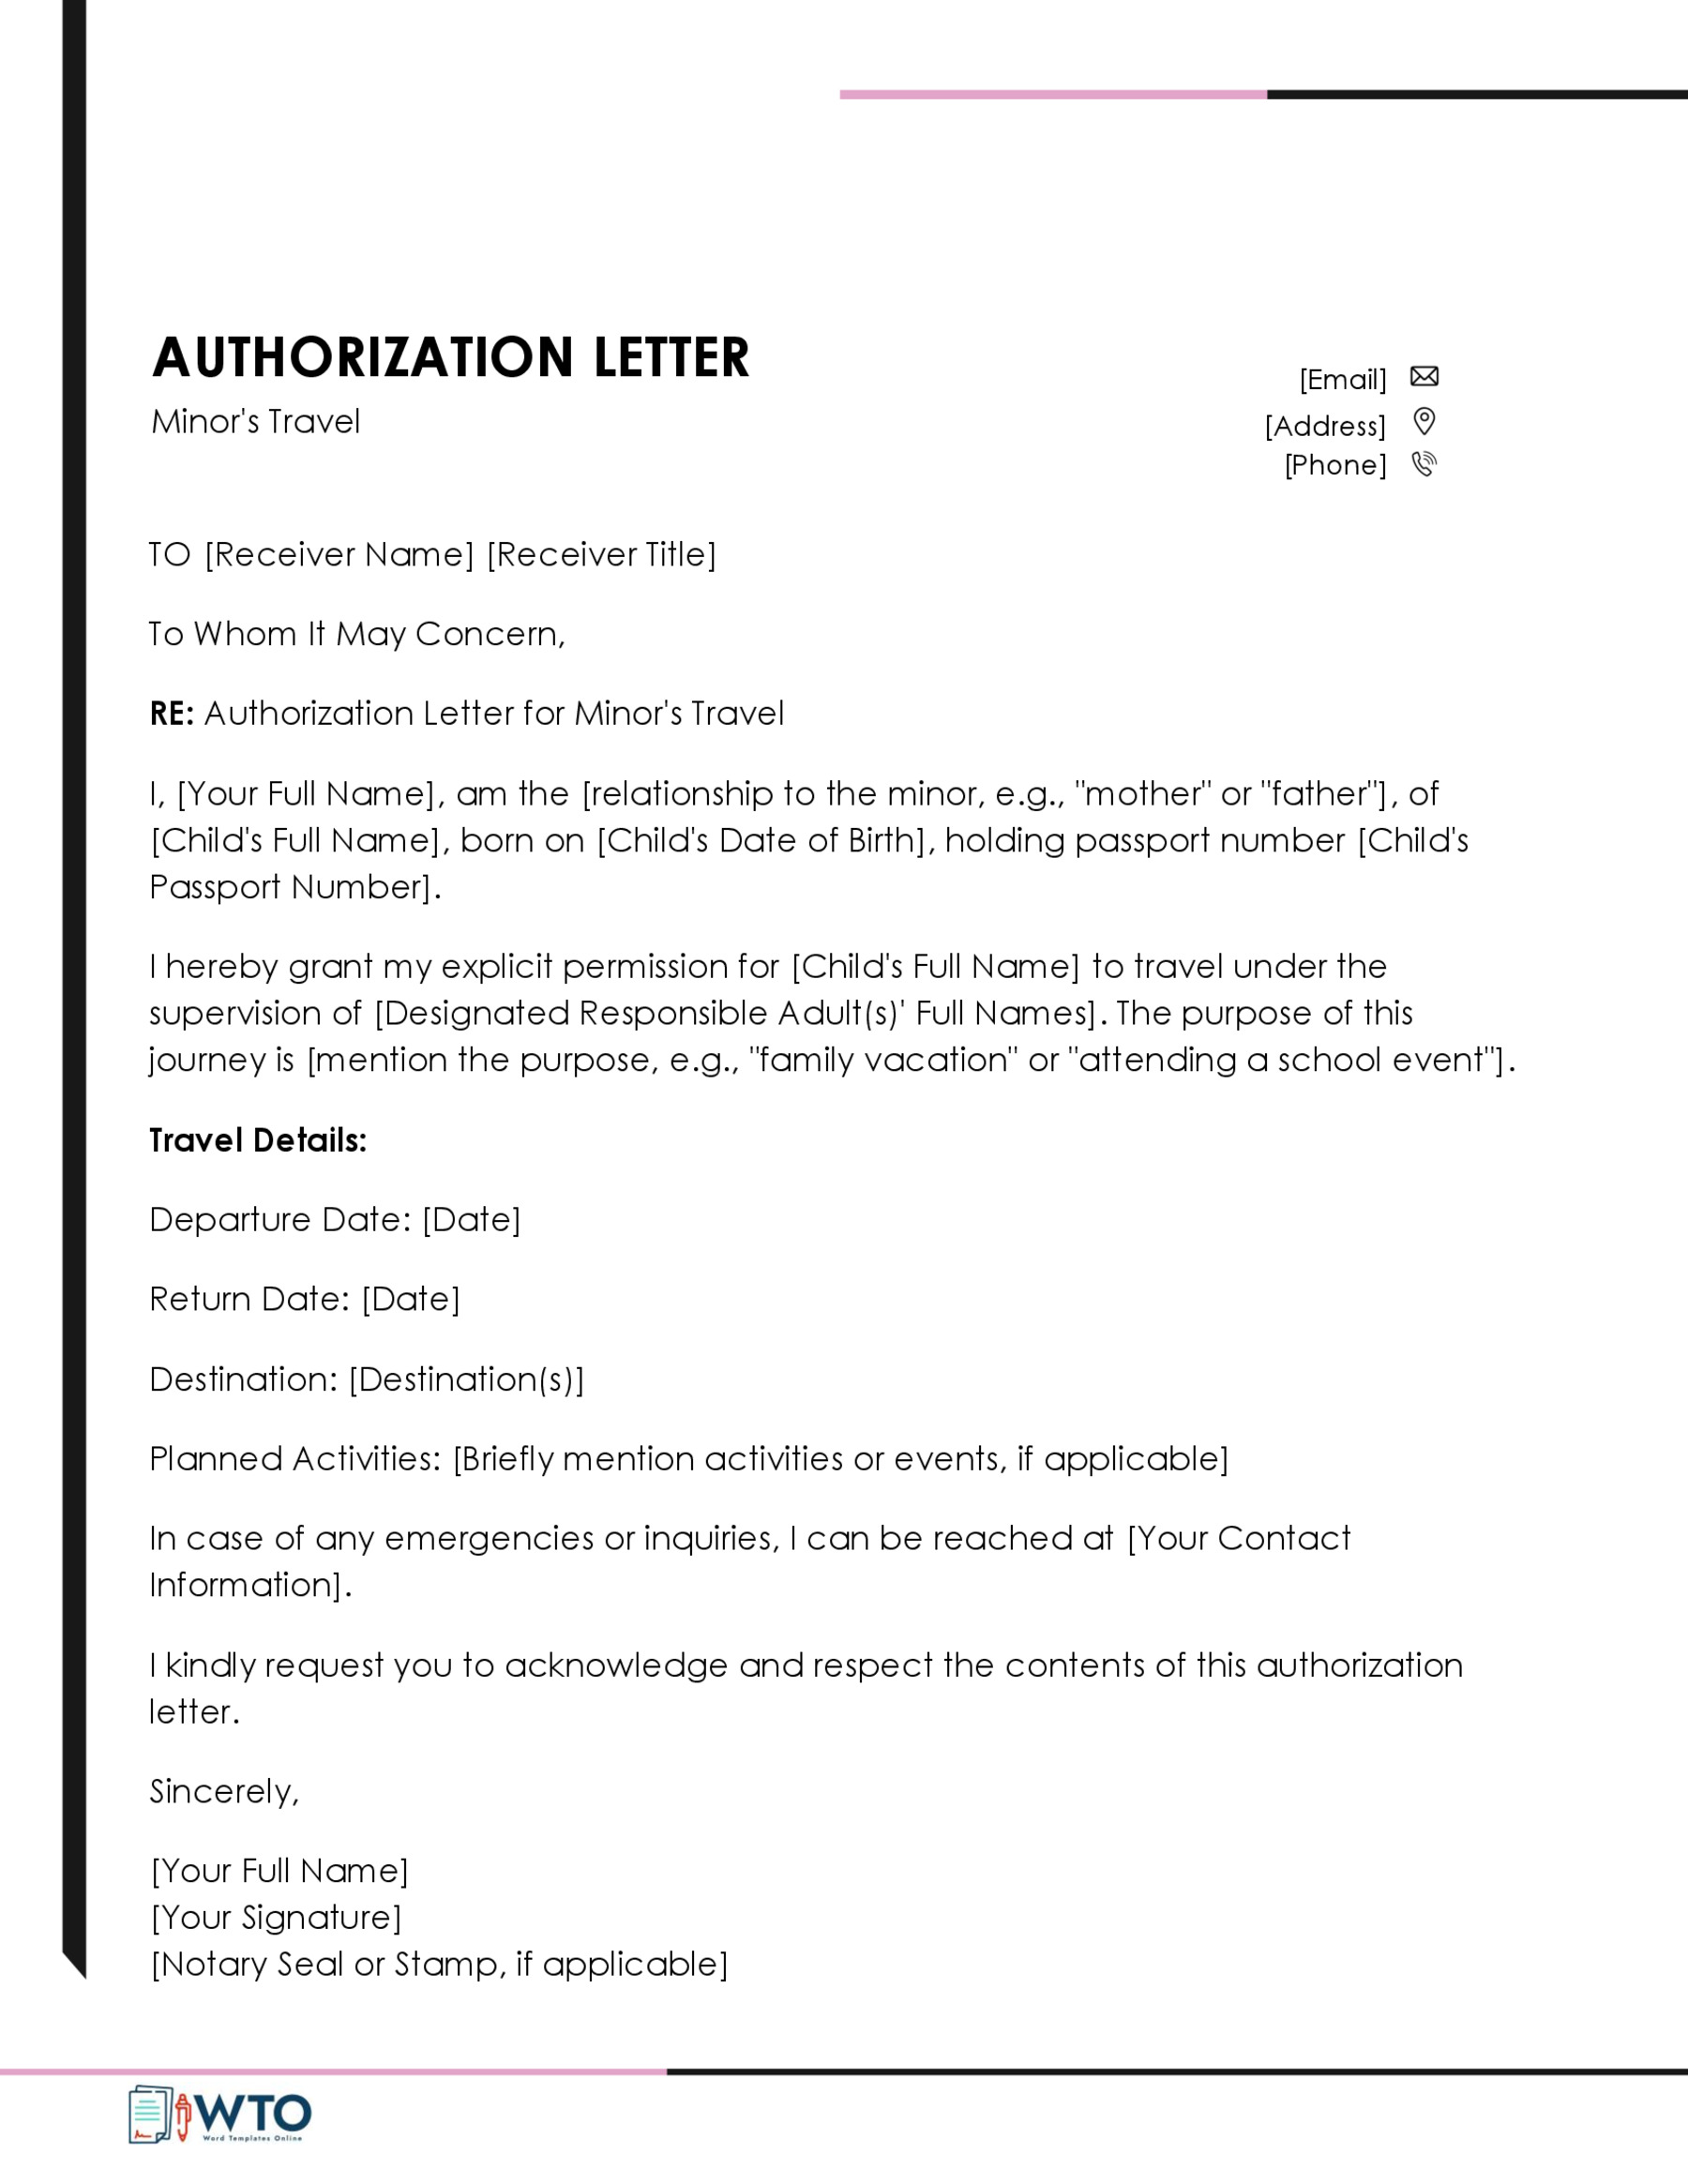 Minor to Travel Letter Template download in word format